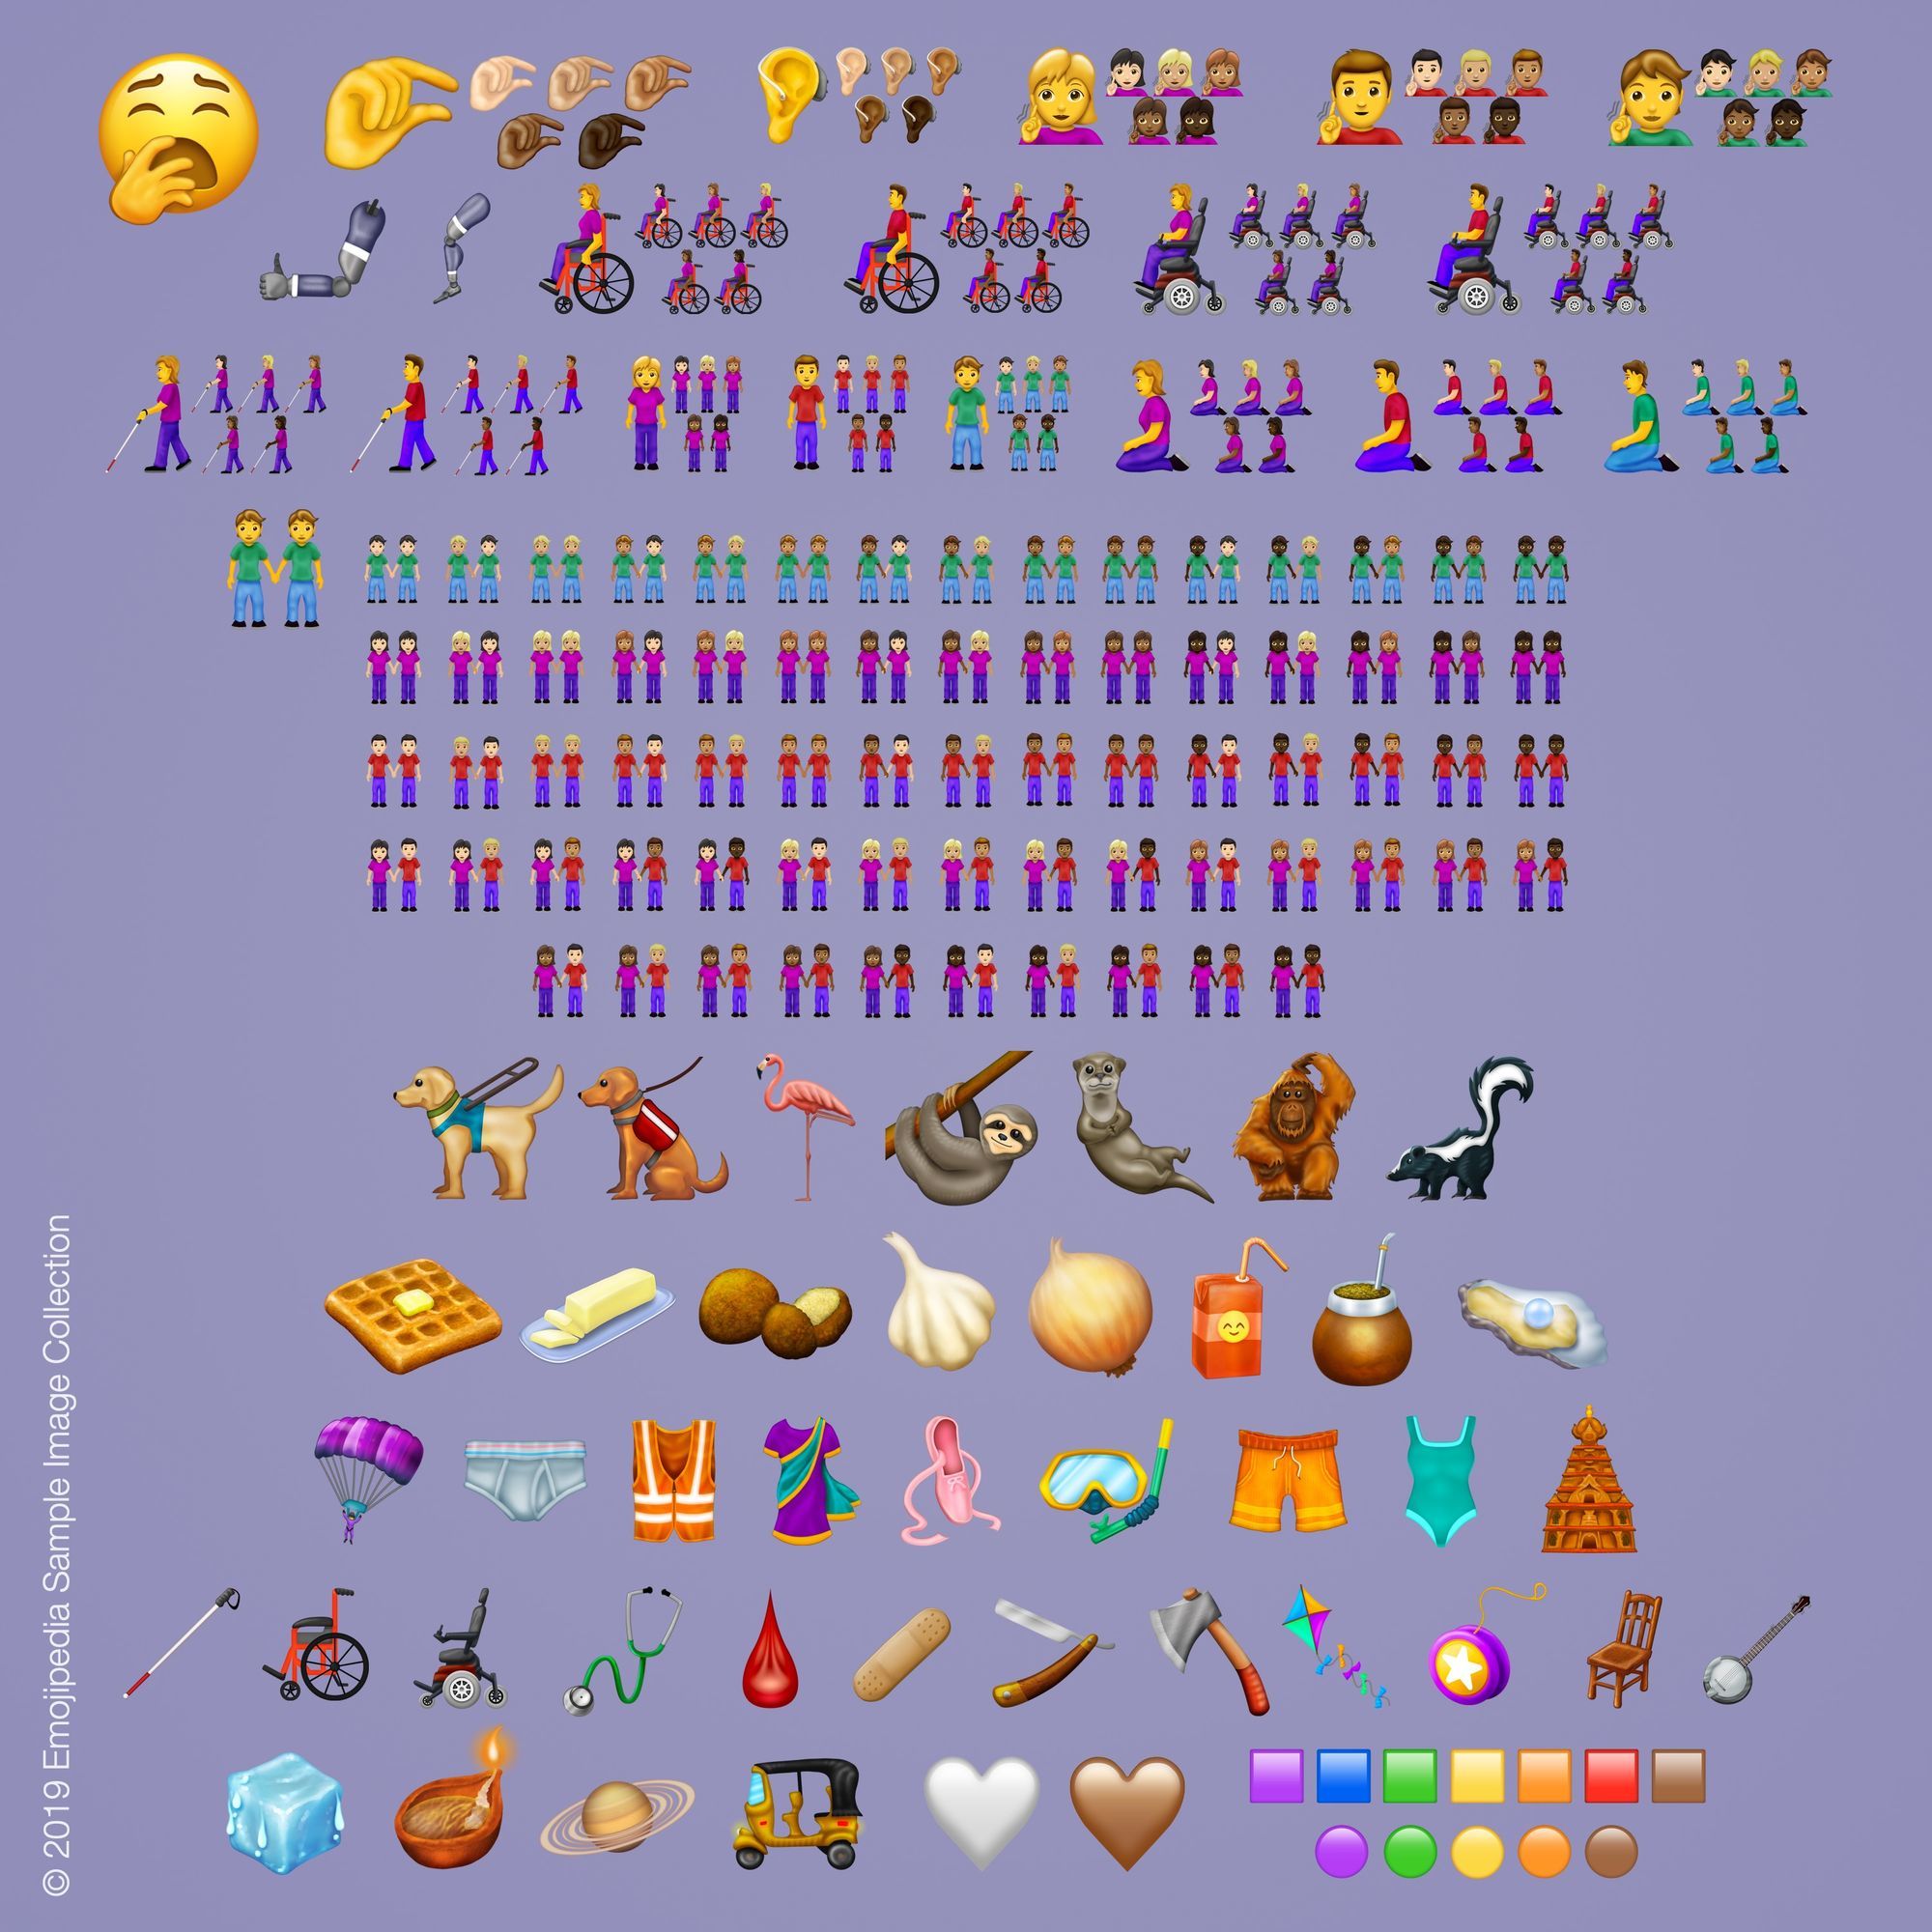 Ladies and gentlemen, here are the new Emoji additions for 2019 - Ladies and gents, these are your new Emoji for 2019